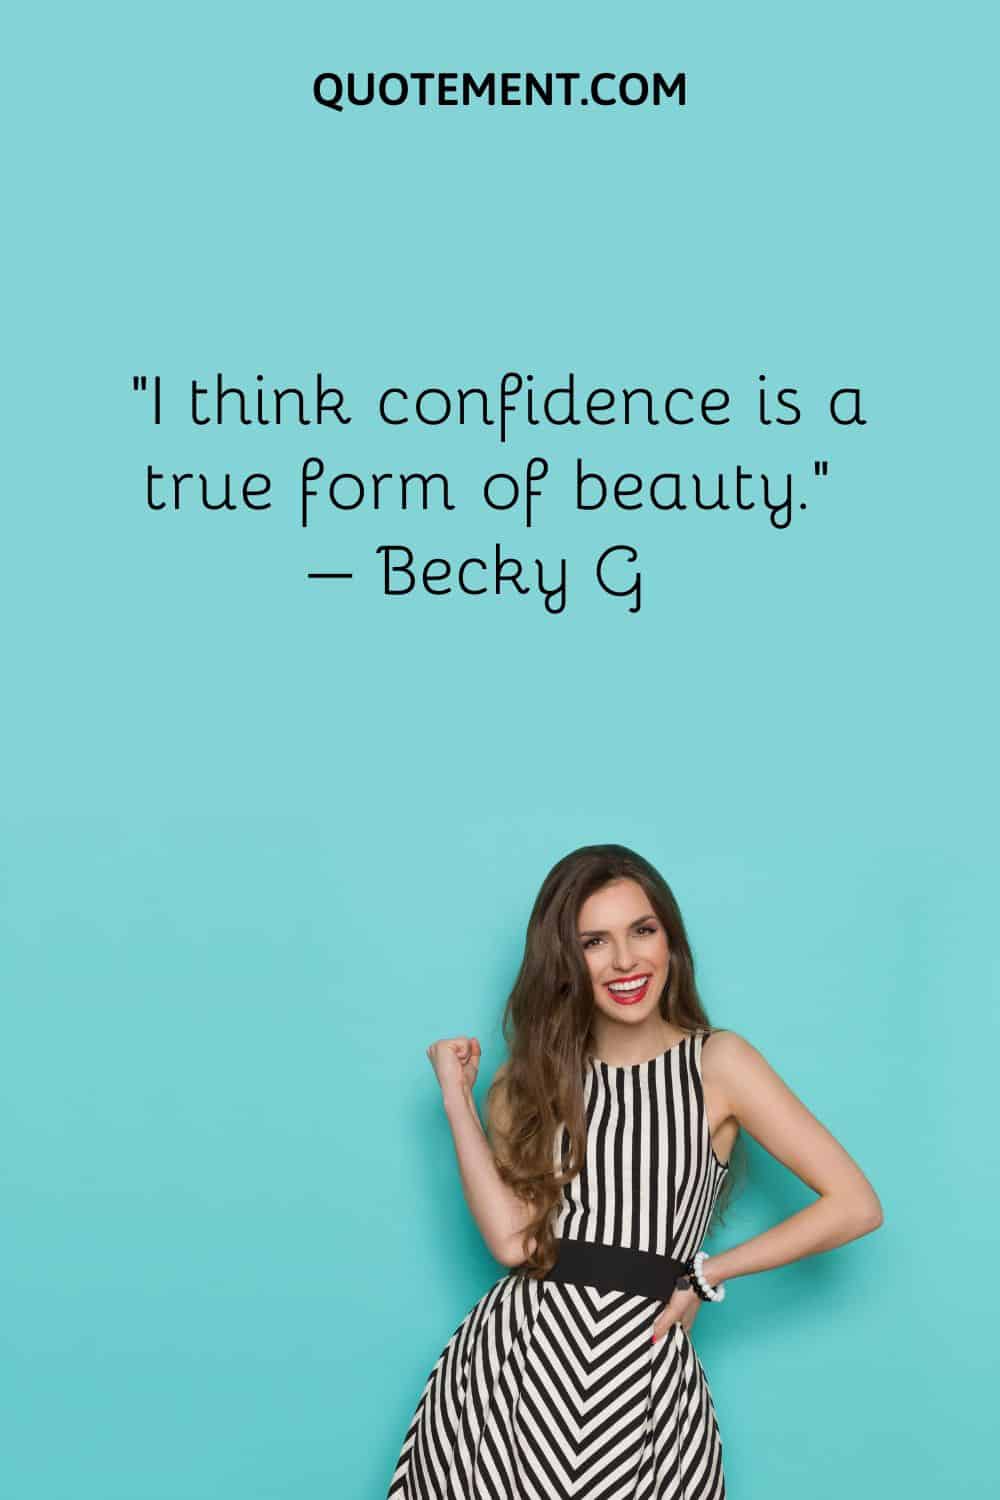 I think confidence is a true form of beauty.